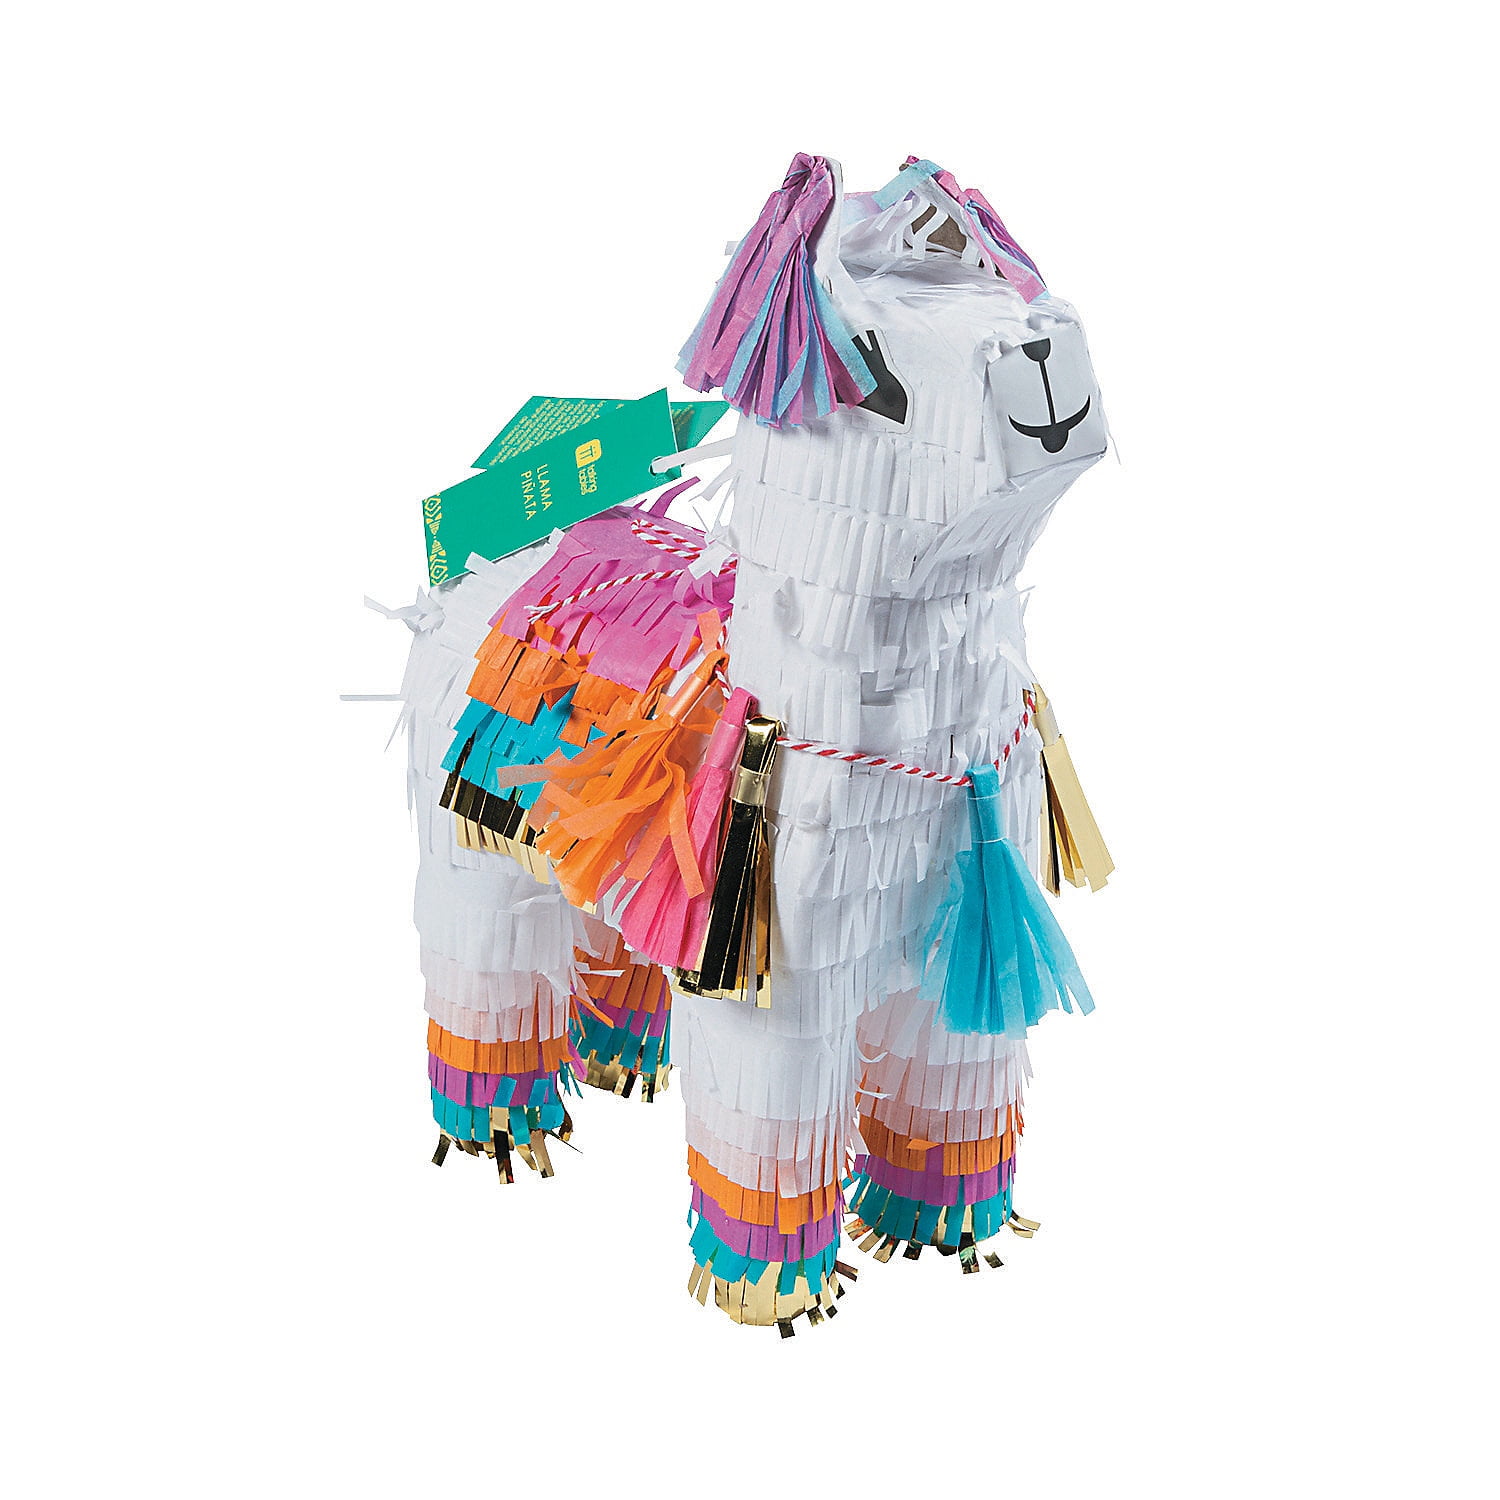 Fiesta Mini Cinco de Mayo Party Details about   3-Pack Miniature Llama Pinatas for Birthday 